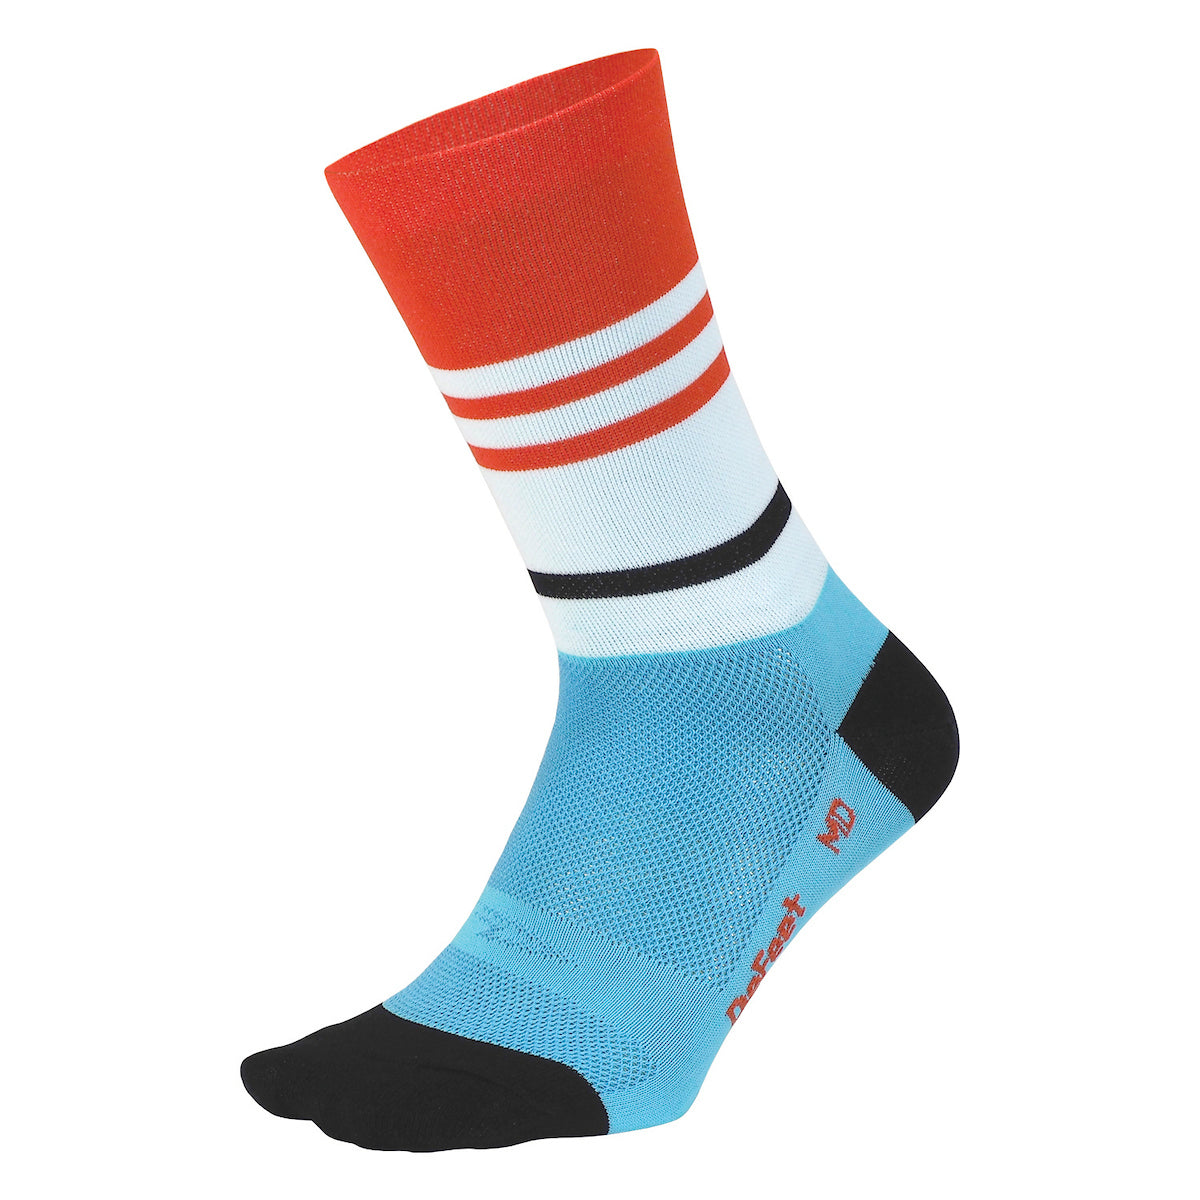 cycling sock with light blue foot and cuff with wide red band and white and black stripes